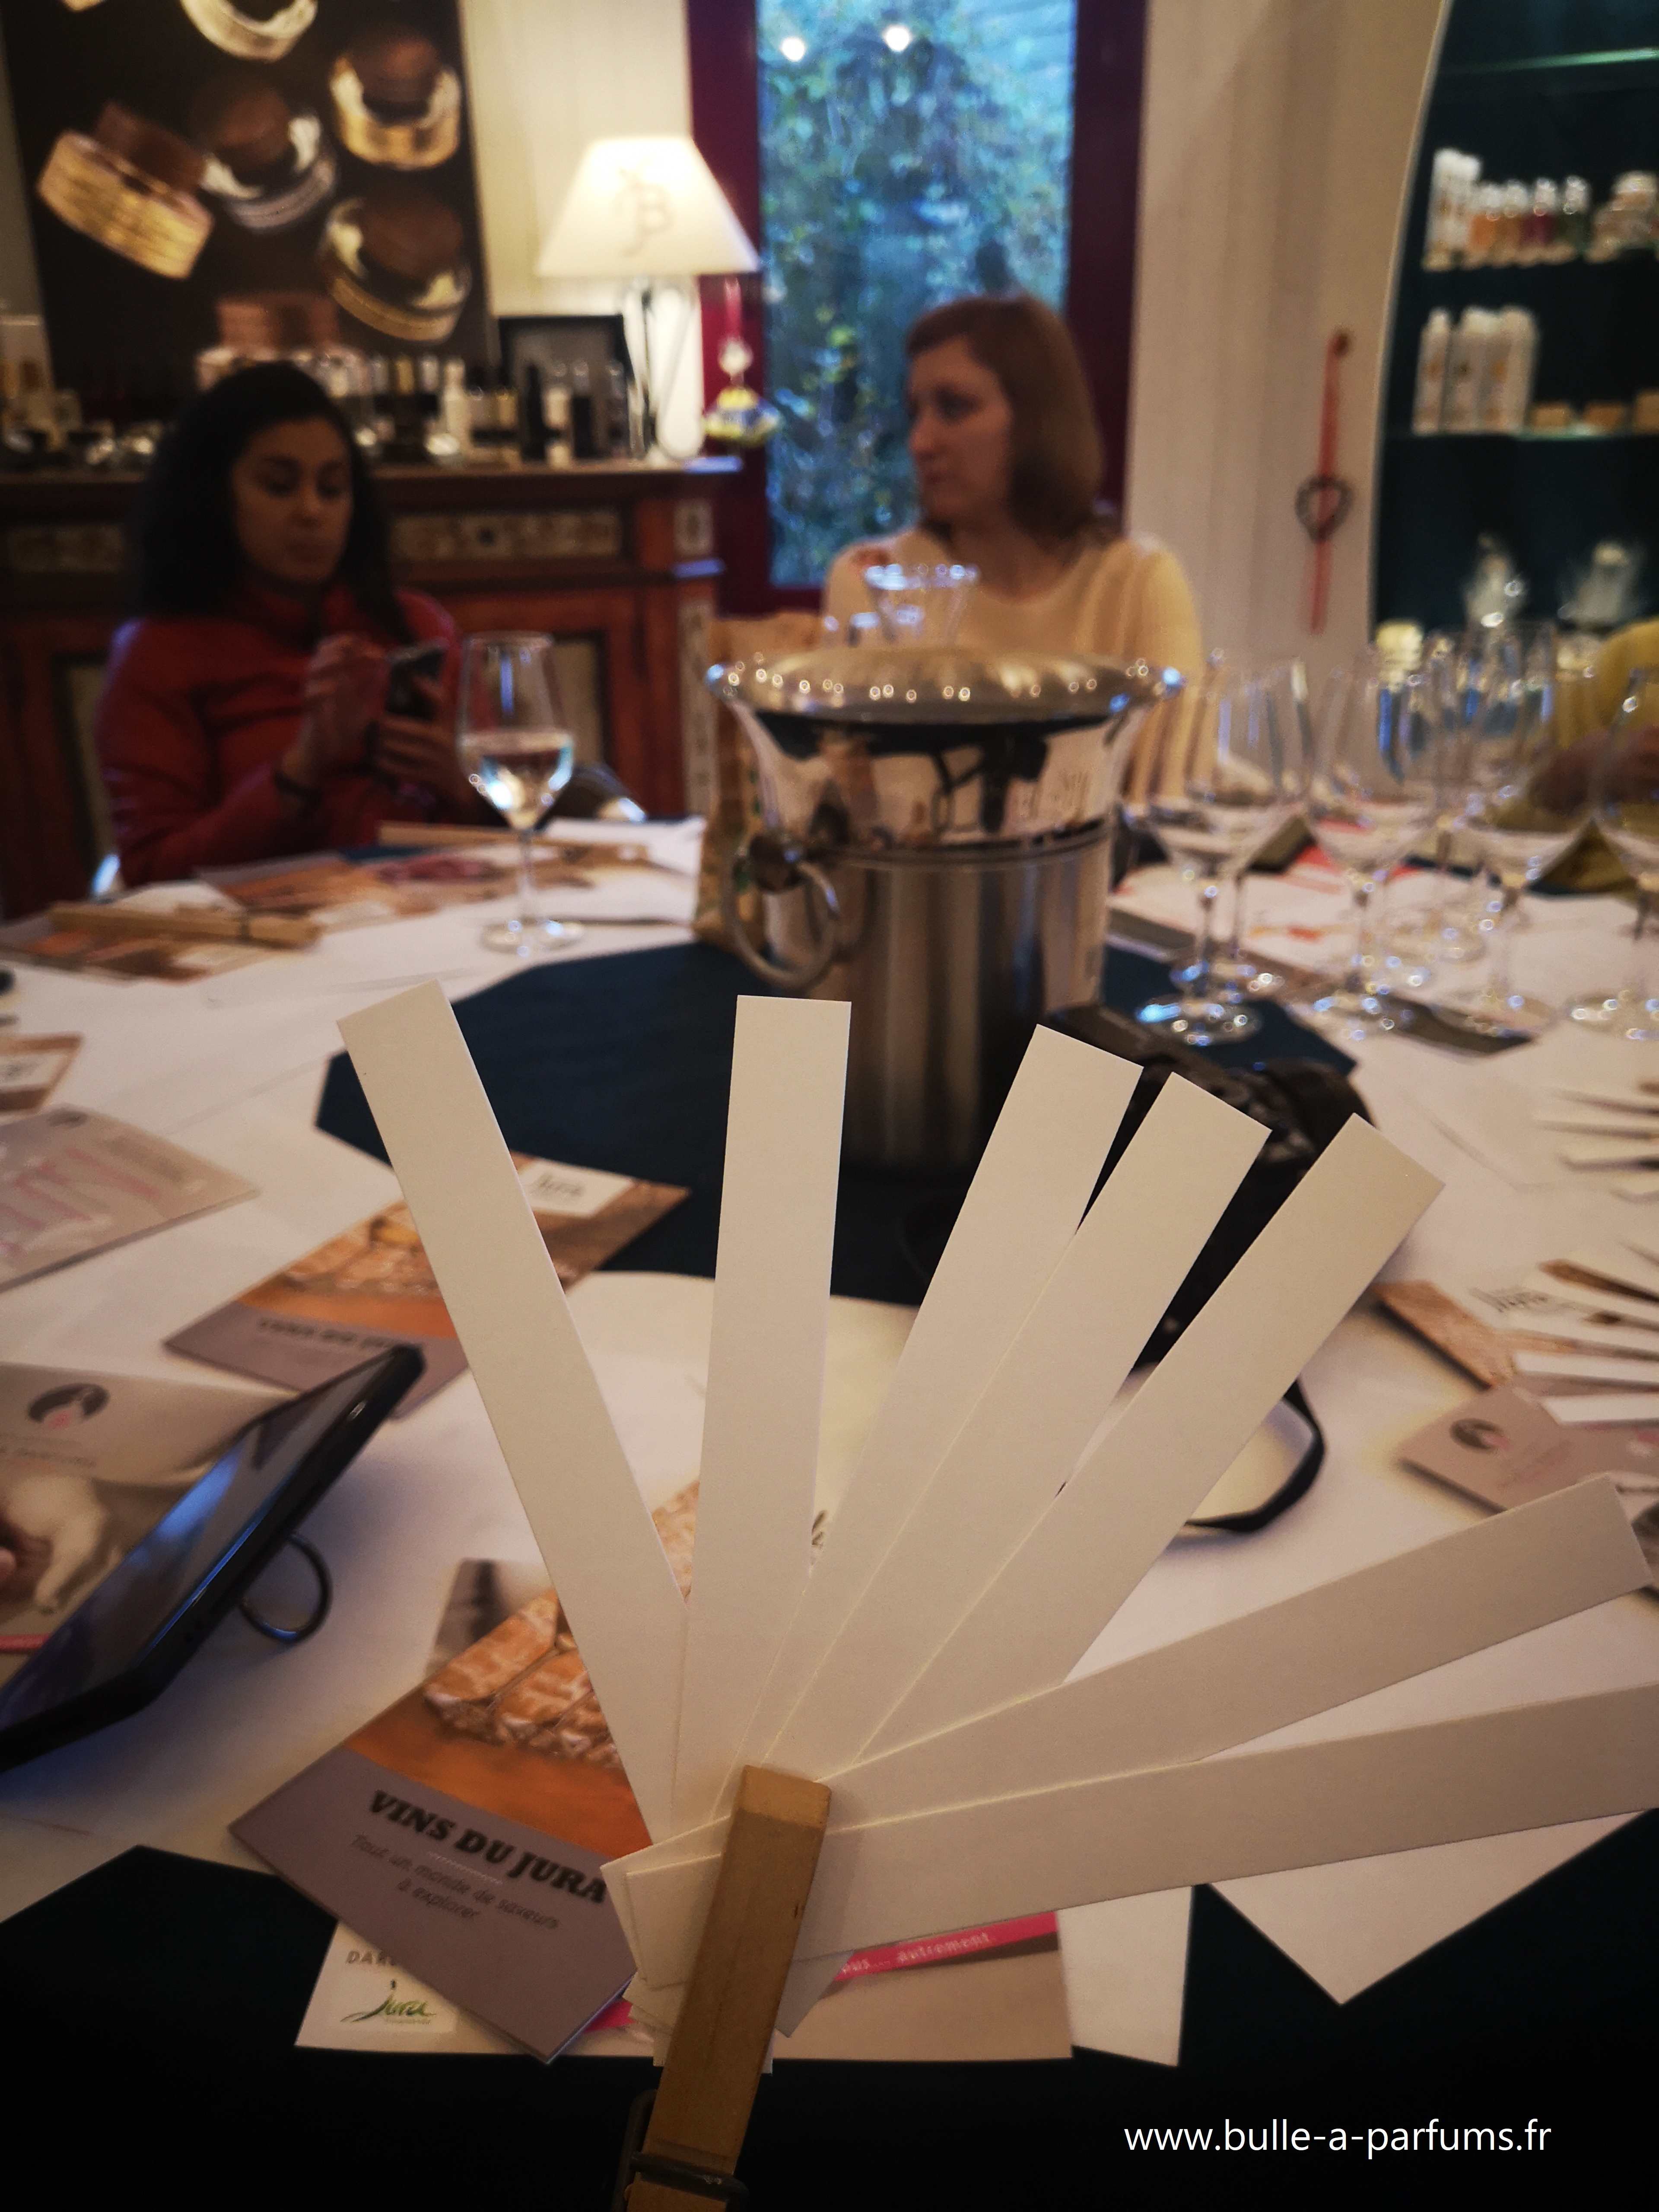 discovery of olfactory families and Jura wine tasting